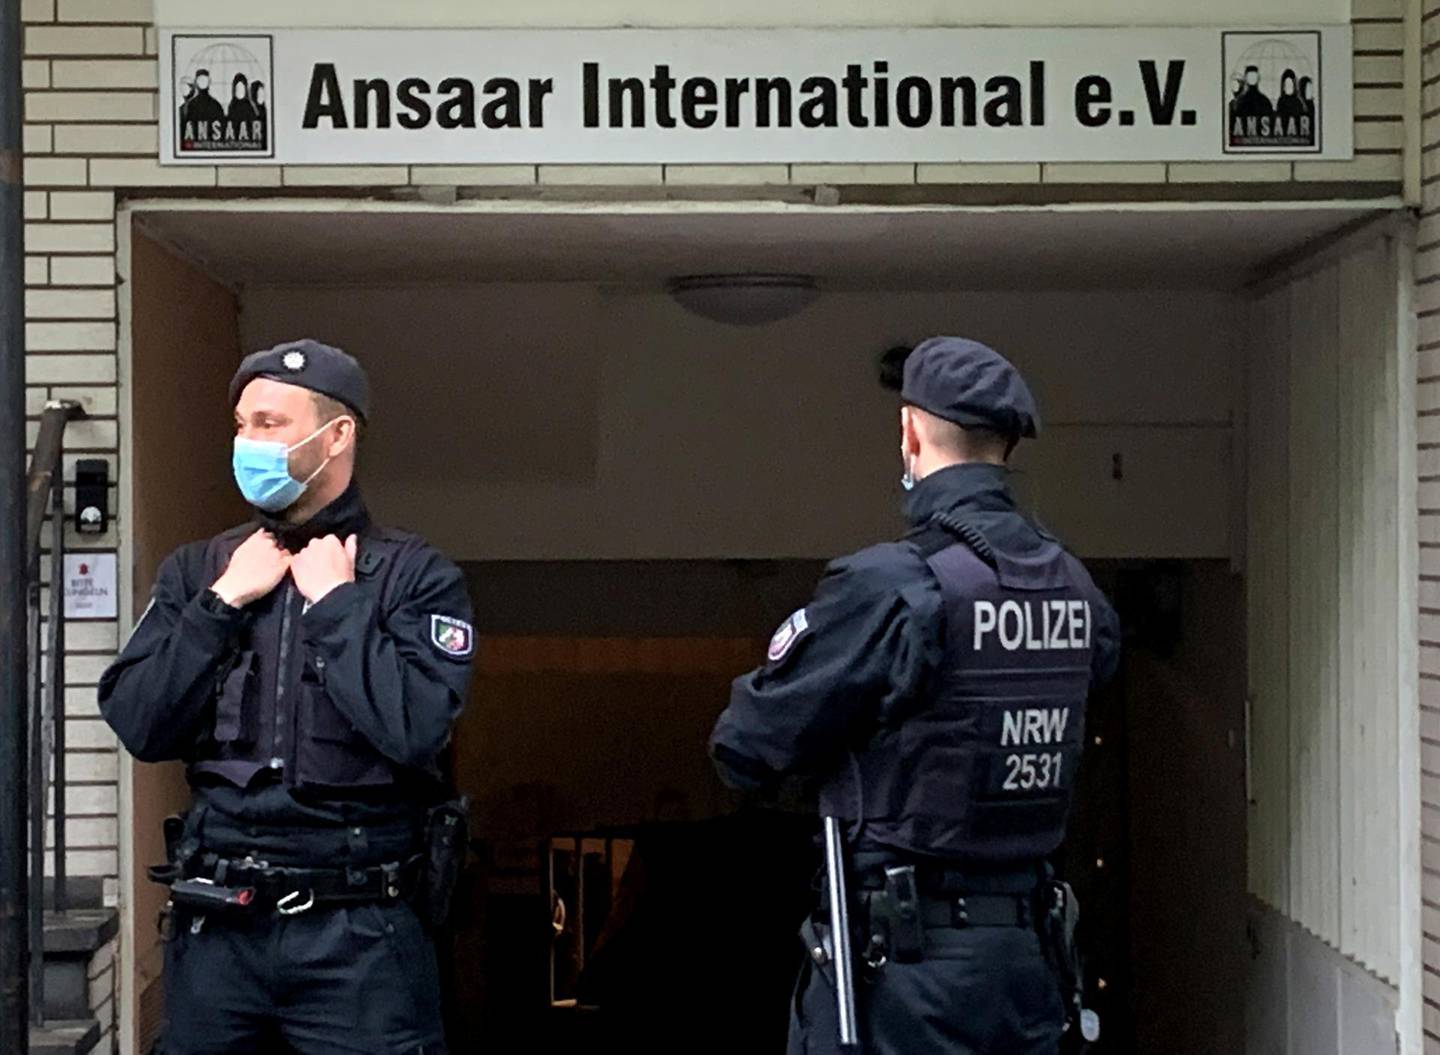 Police secures a building after Germany banned the Islamic organisation Ansaar International in Duesseldorf, Germany, May 5, 2021.     REUTERS/Erol Dogrudogan